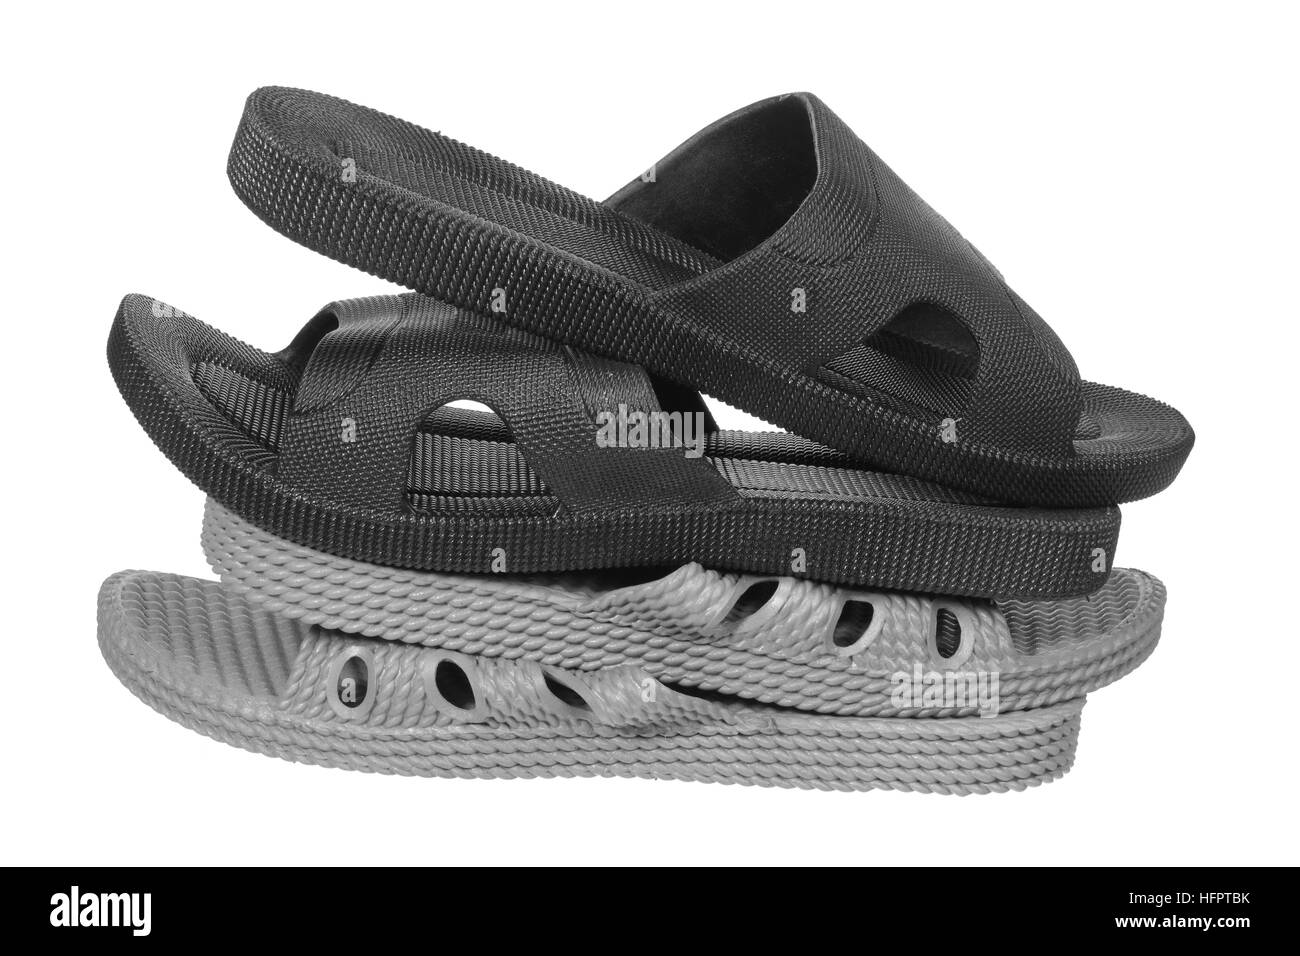 Rubber slippers Black and White Stock Photos & Images - Alamy